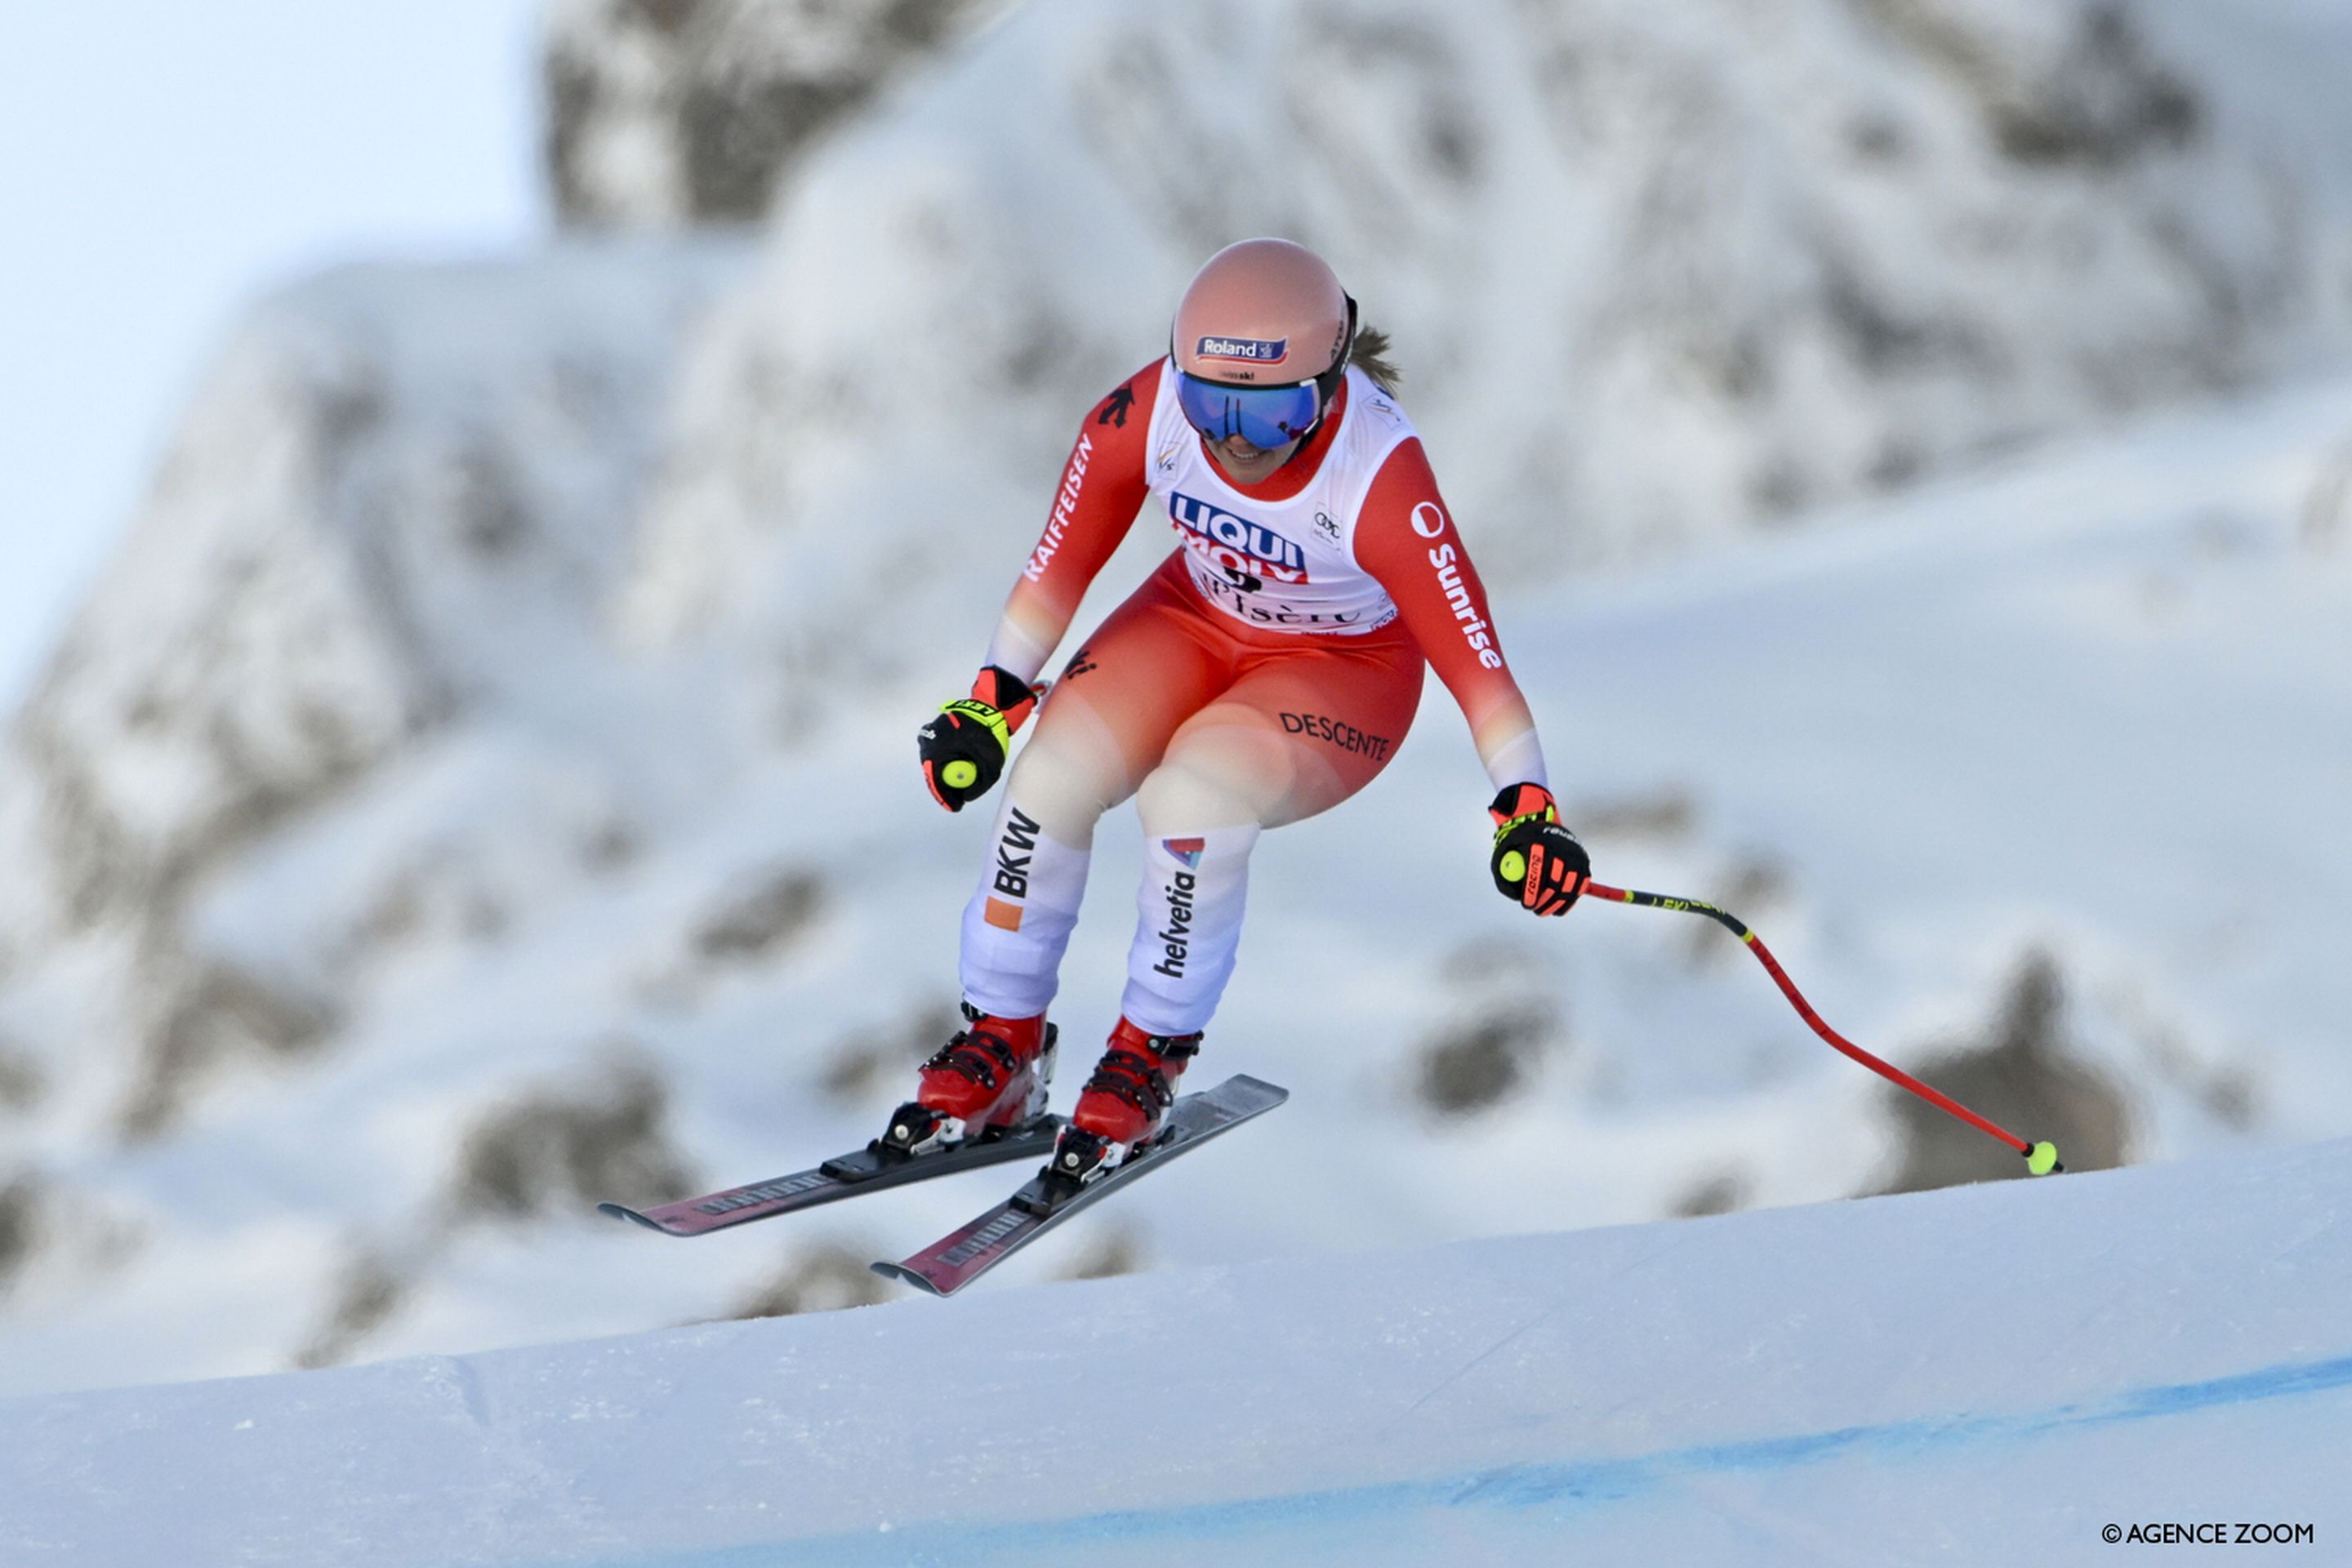 Joana Haehlen (SUI) equalled her best World Cup result by finishing second (Agence Zoom)